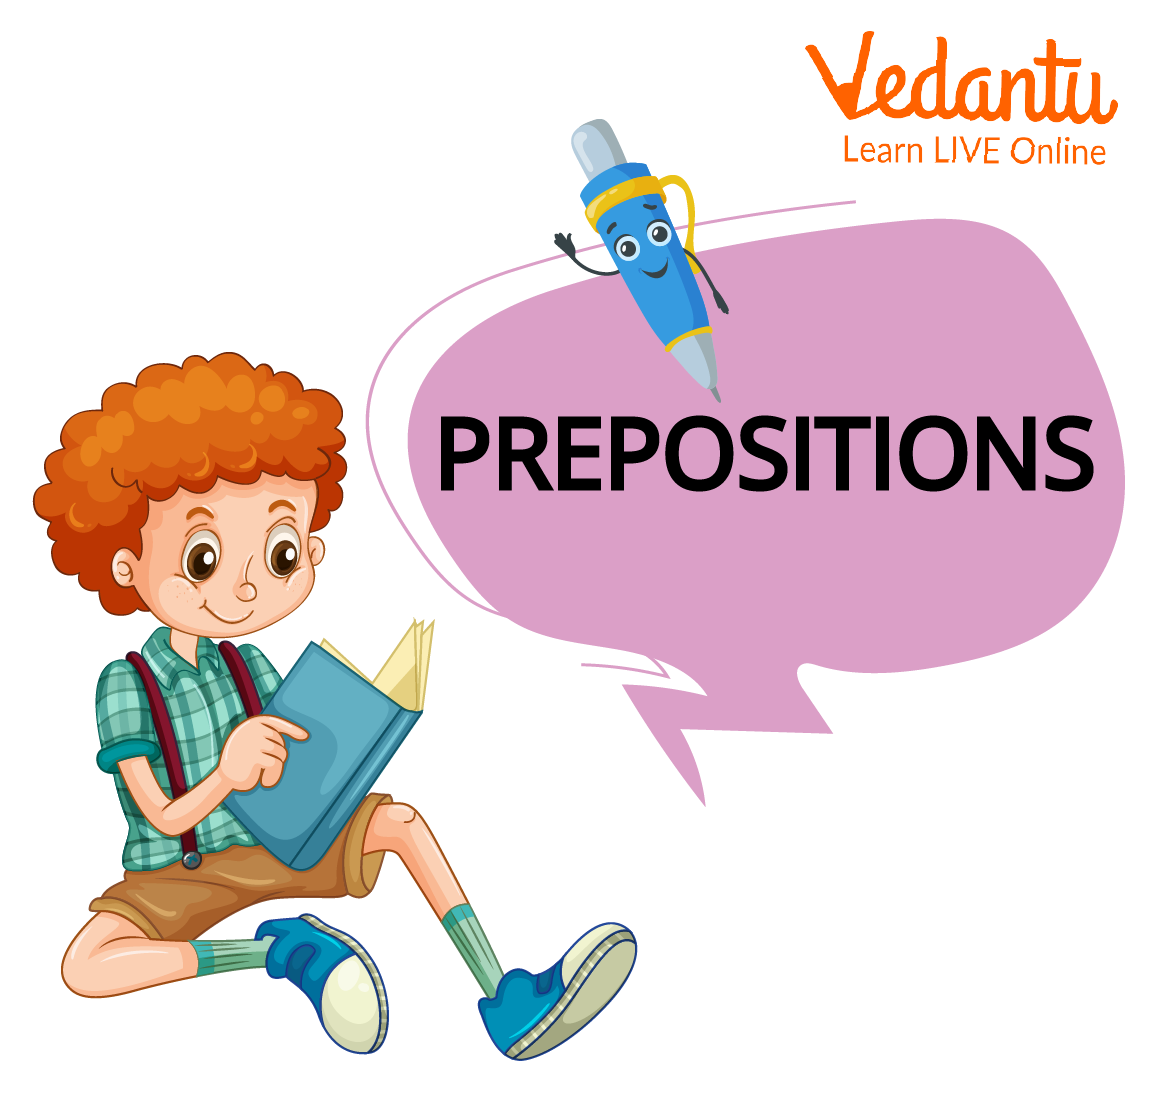 Introduction to Prepositions.